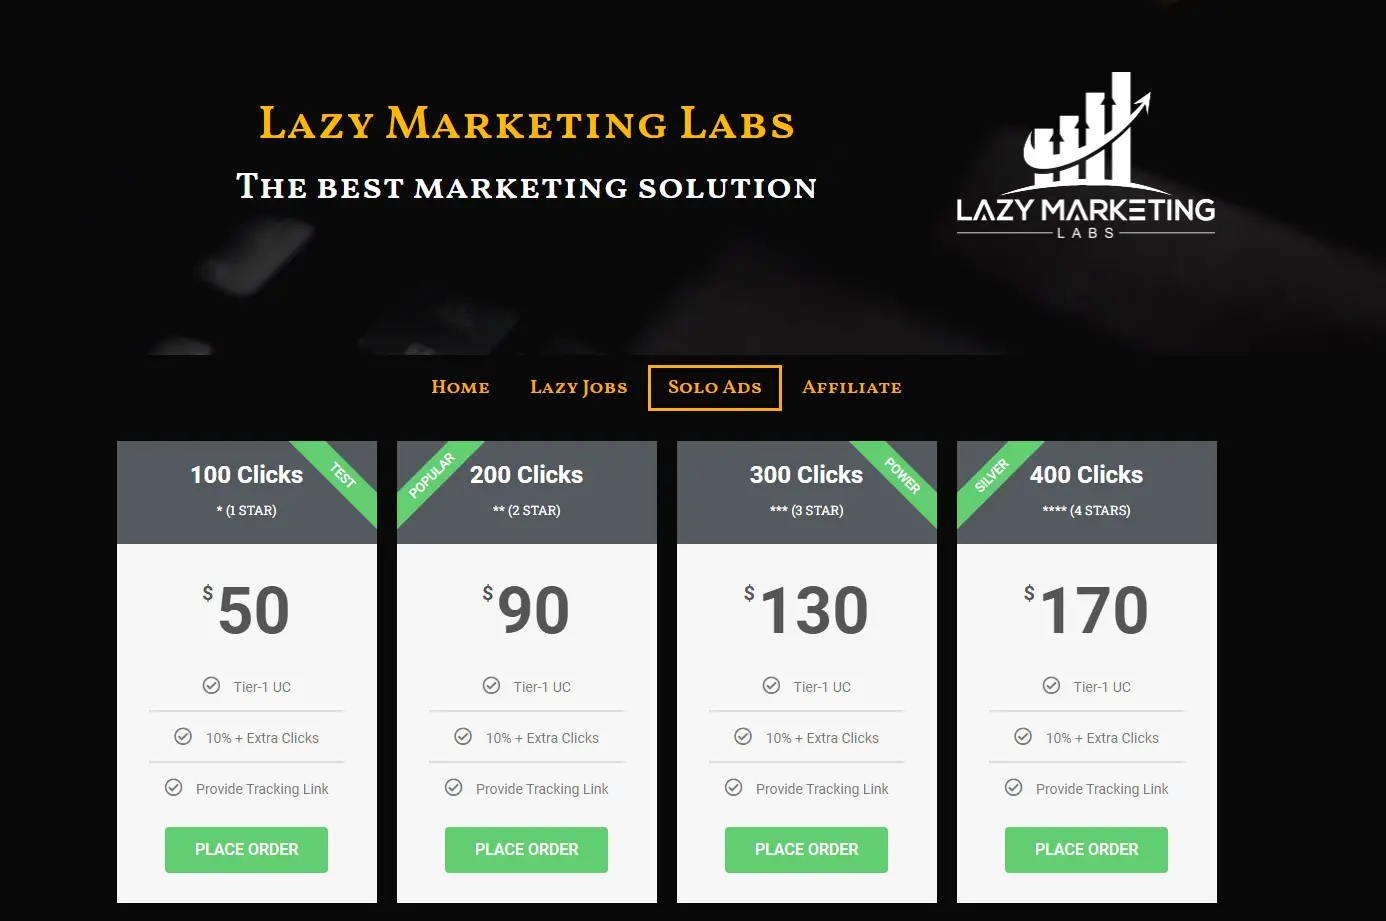 Lazy Marketing Labs Page